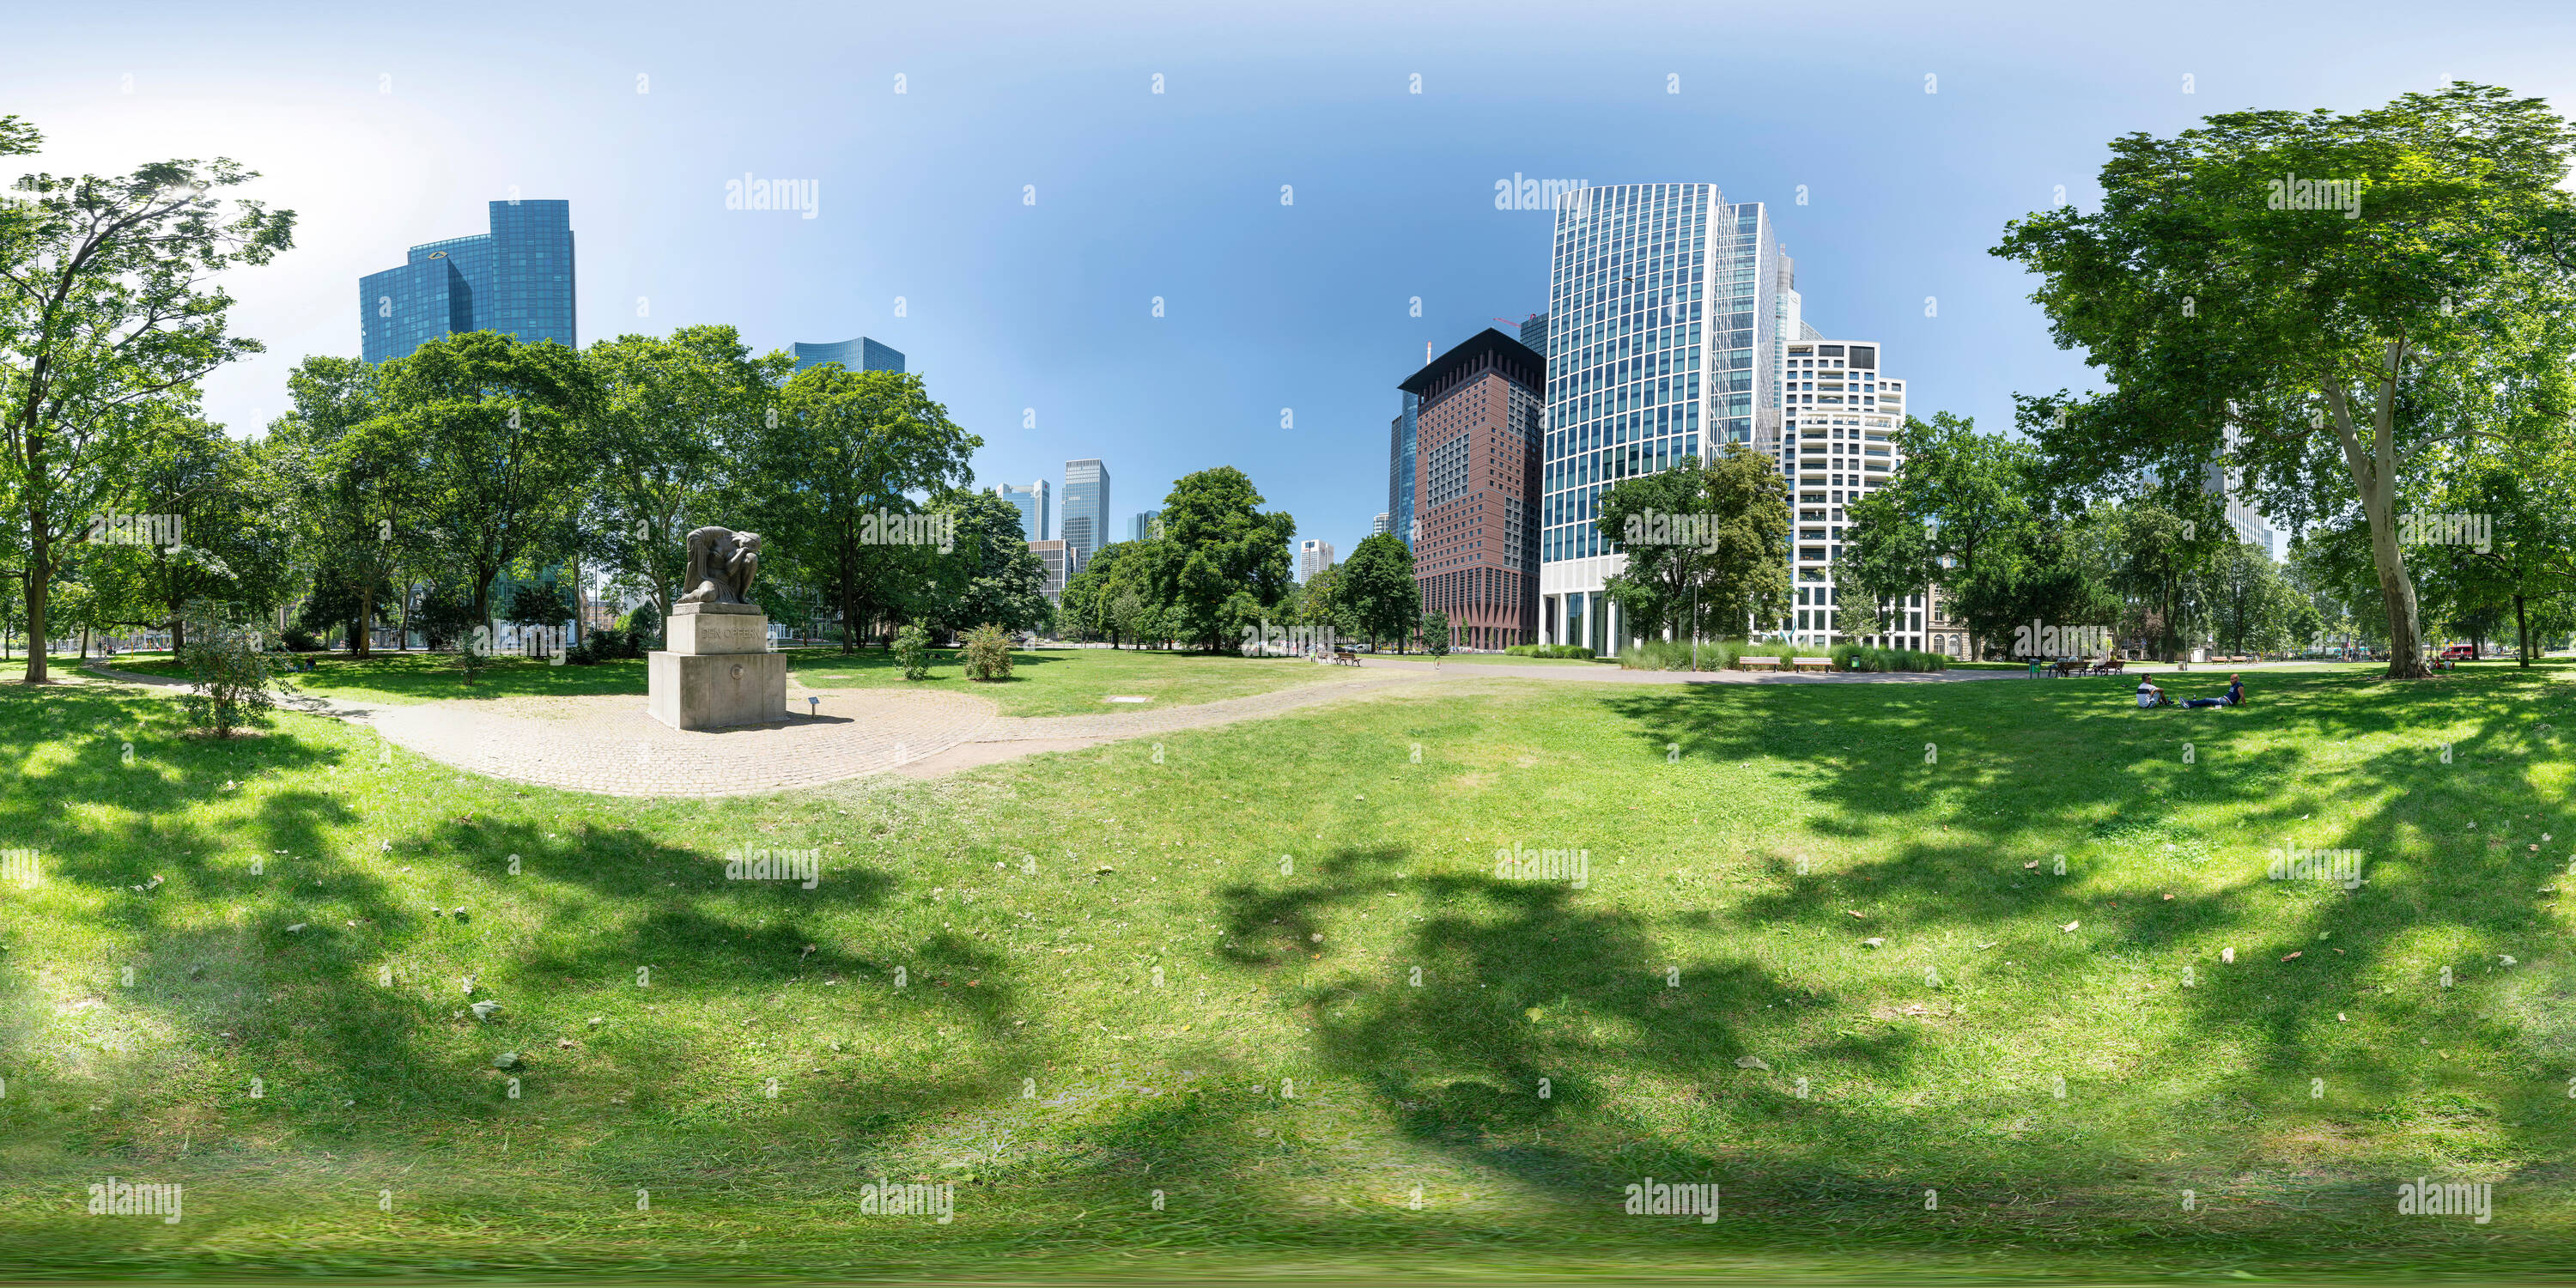 360 View Of Frankfurt Germany July 19 A 360 Panoramic View Of The Gallusanlage Park In The Center Of The City Alamy